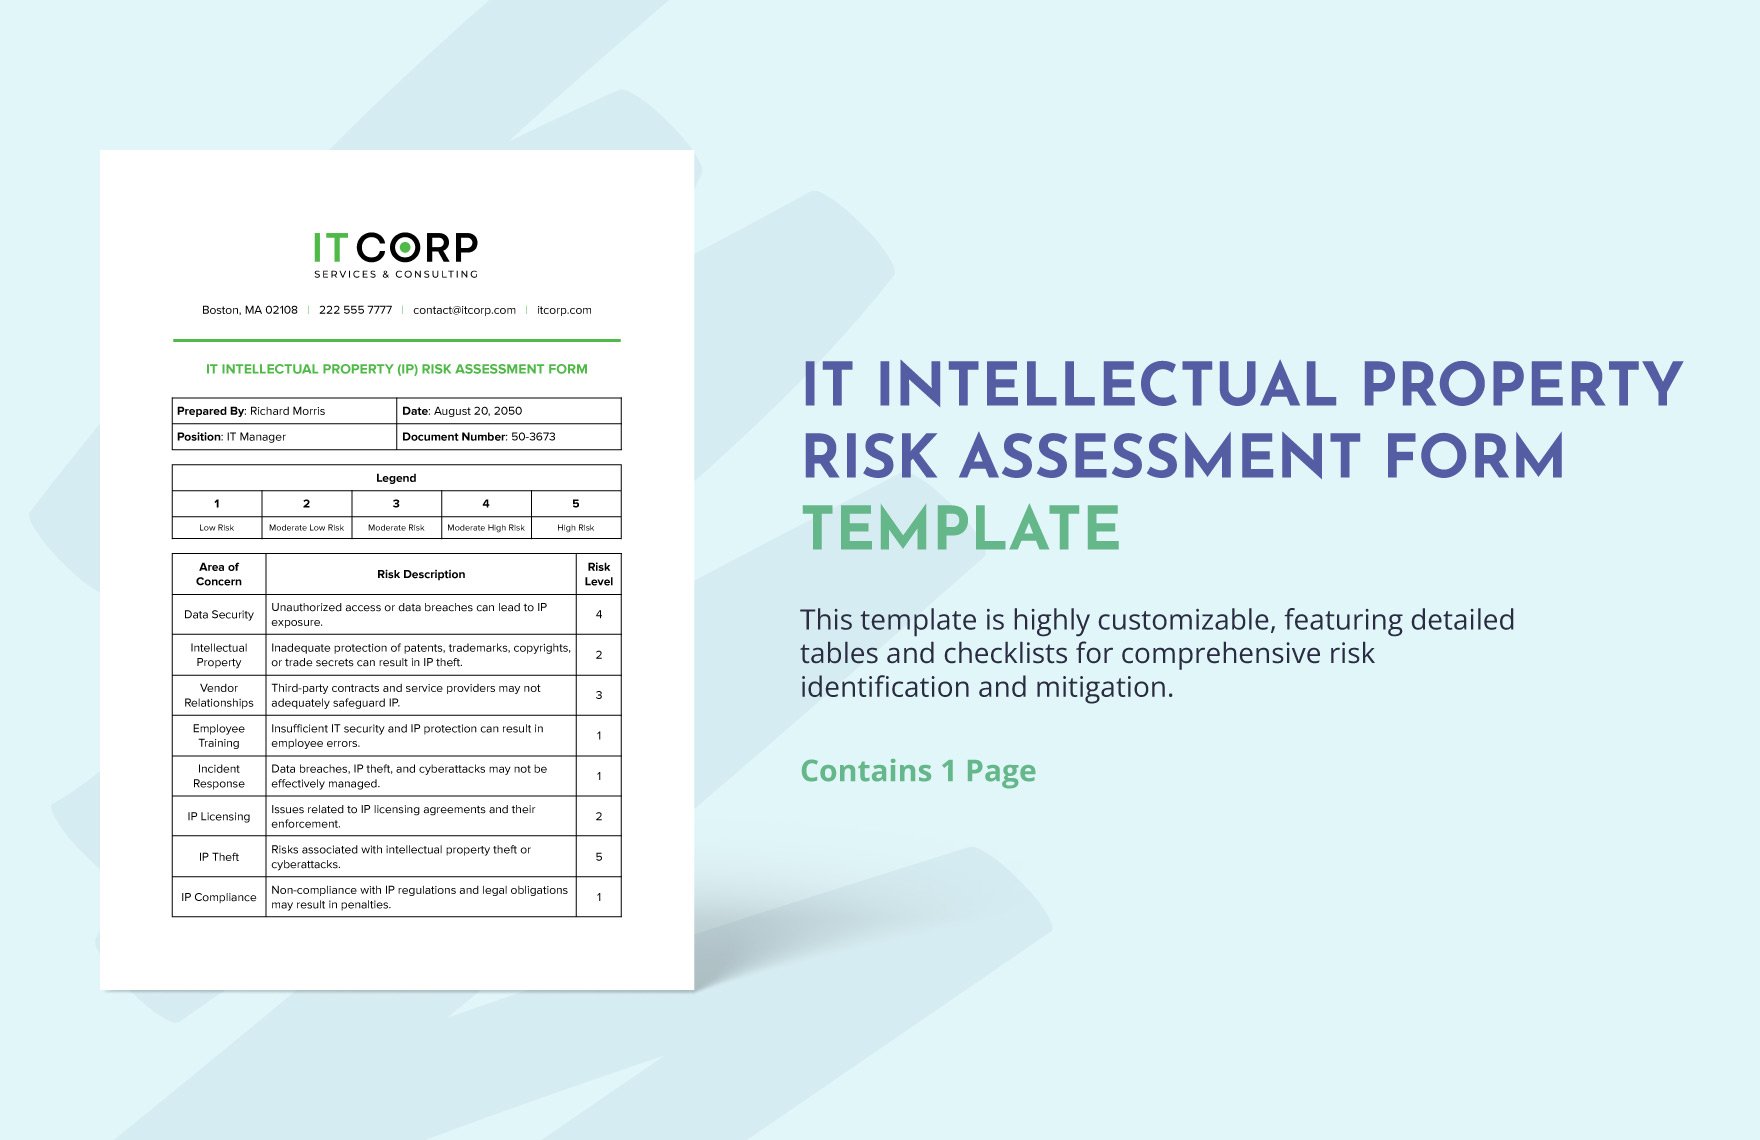 IT Intellectual Property Risk Assessment Form Template in Word, Google Docs, PDF